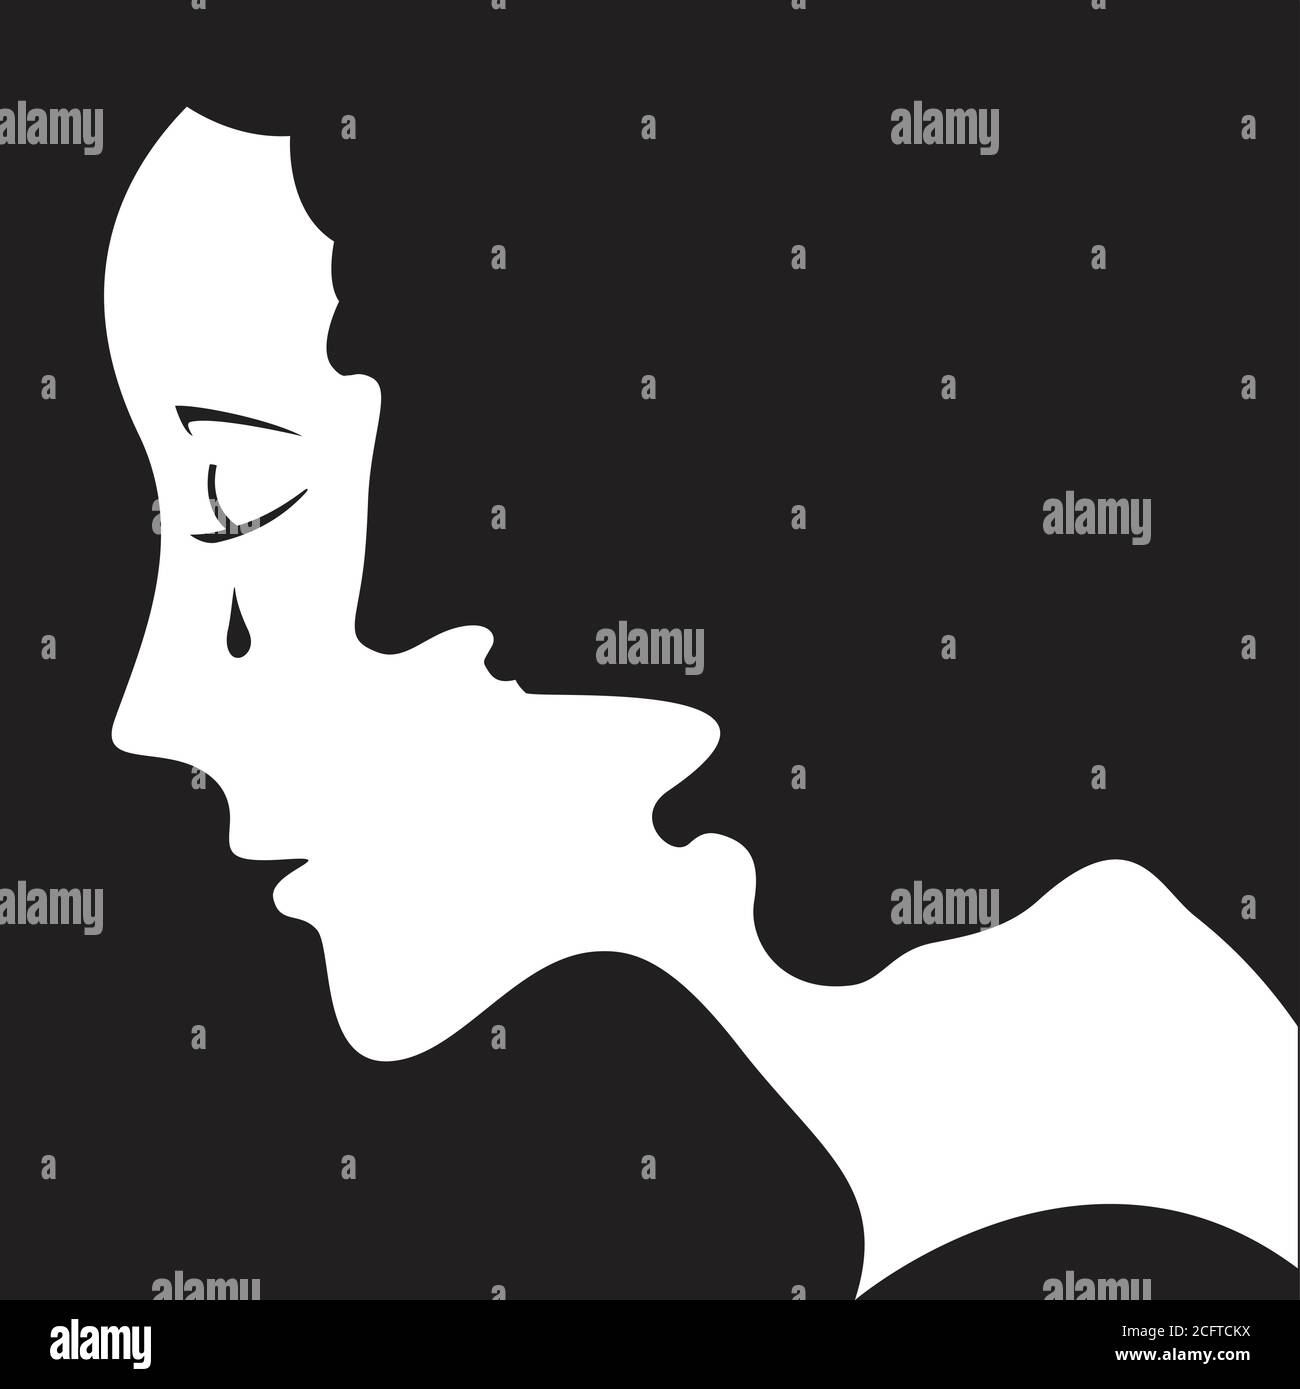 Woman is crying. Abusive, angry man behind her forms a shape of woman’s hair. Negative space design. Stop domestic violence concept. Stock Vector